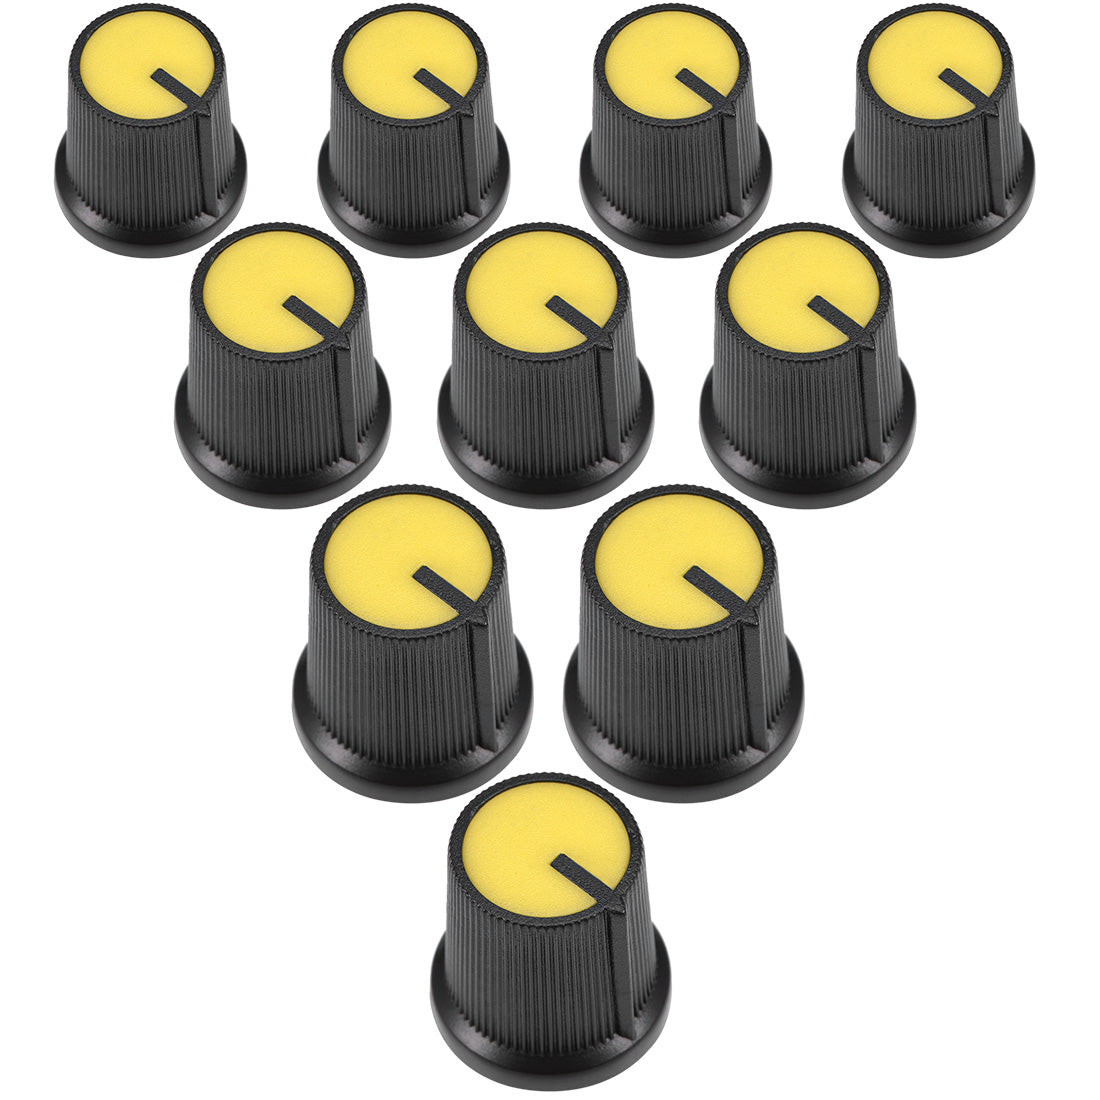 Uxcell Uxcell 10Pcs 15x15mm Plastic Potentiometer Volume Control Rotary Knob Knurled Shaft Hole Yellow